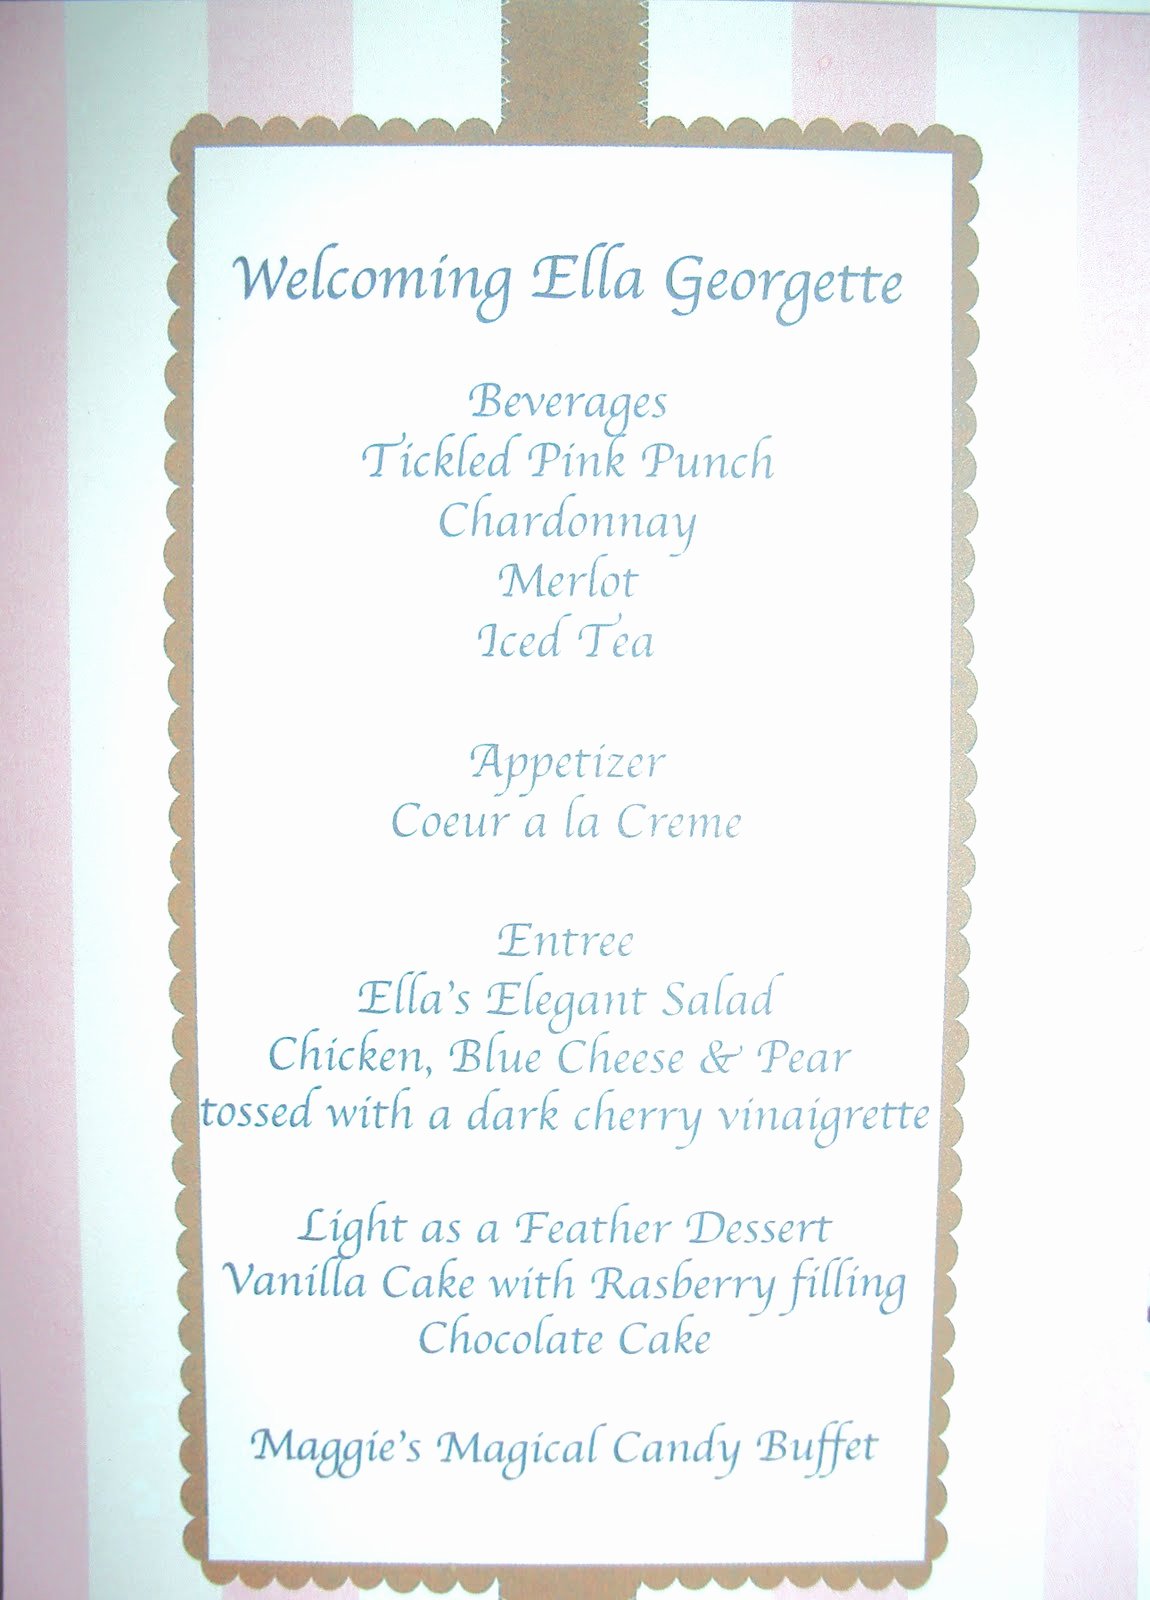 Baby Shower Menu Cards Beautiful My Georgie Girl I Never Got to Share My Baby Shower Pictures